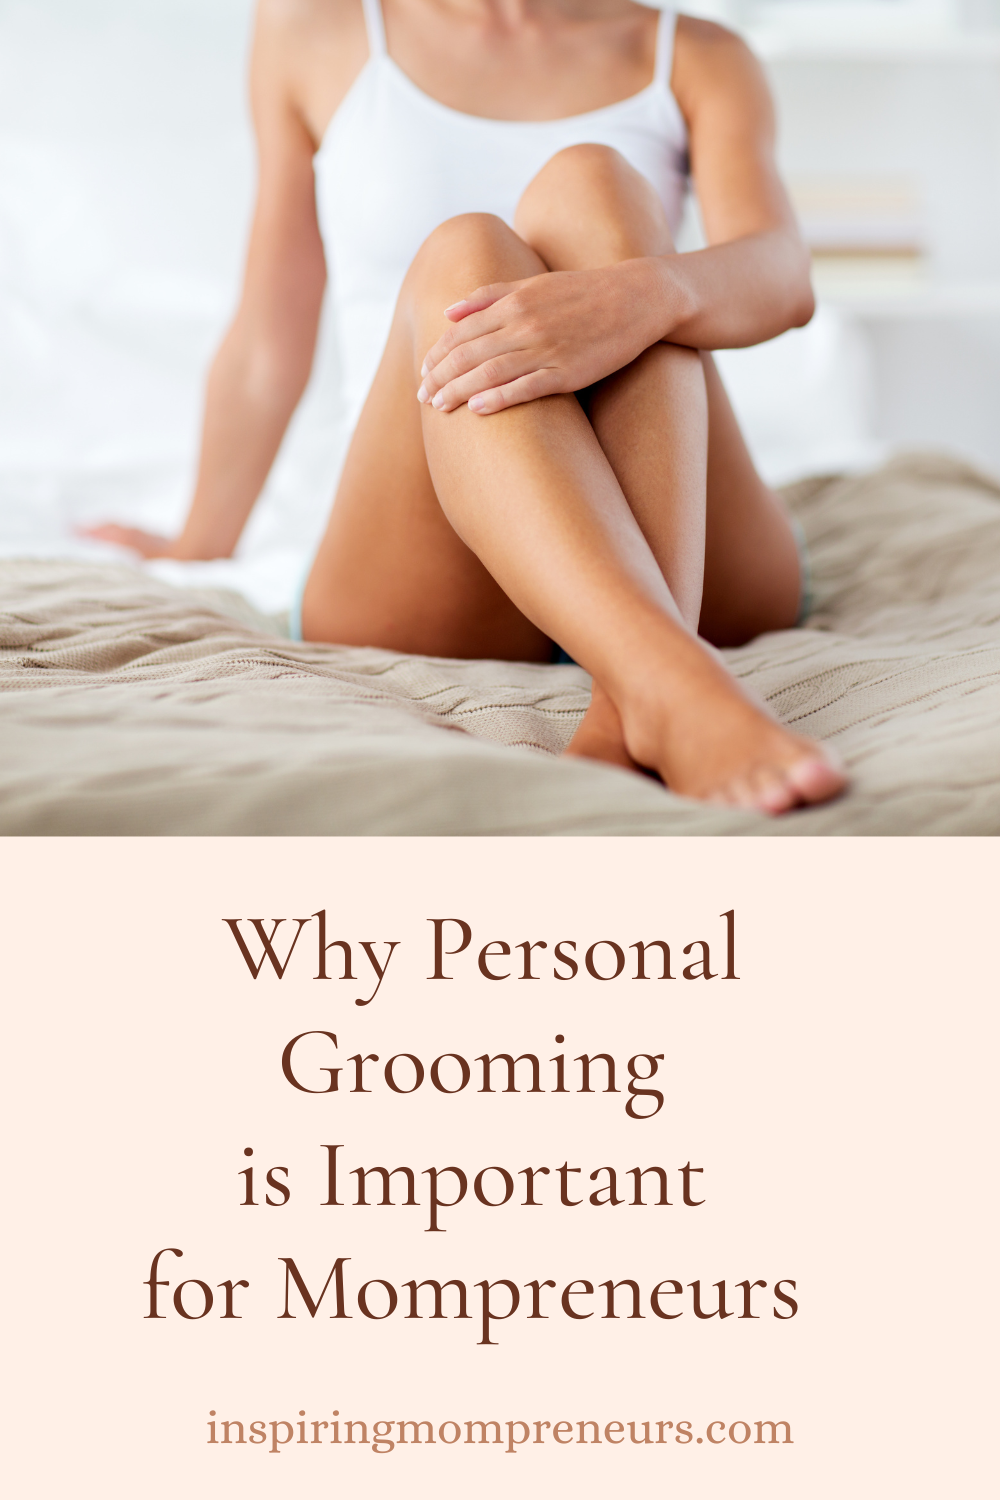 Personal grooming is important (even vital) if you are a Mompreneur looking to grow her business. Read on to find out what makes it so crucial to your success.